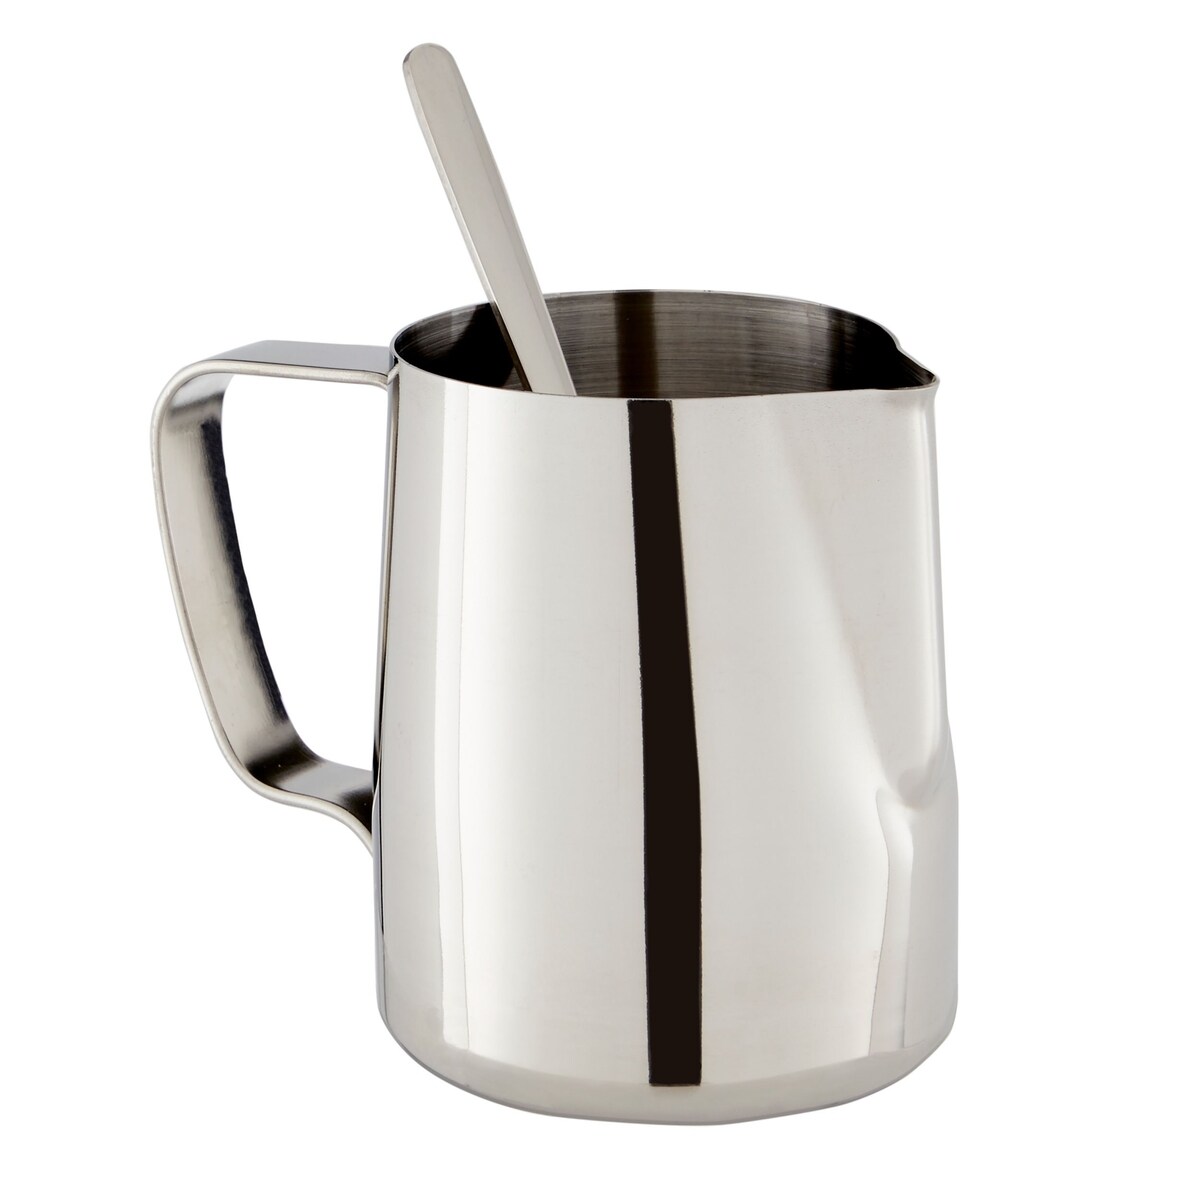 Professional Milk Frothing Pitcher Stainless Steel Milk Frother Cup Milk  Frother Container 